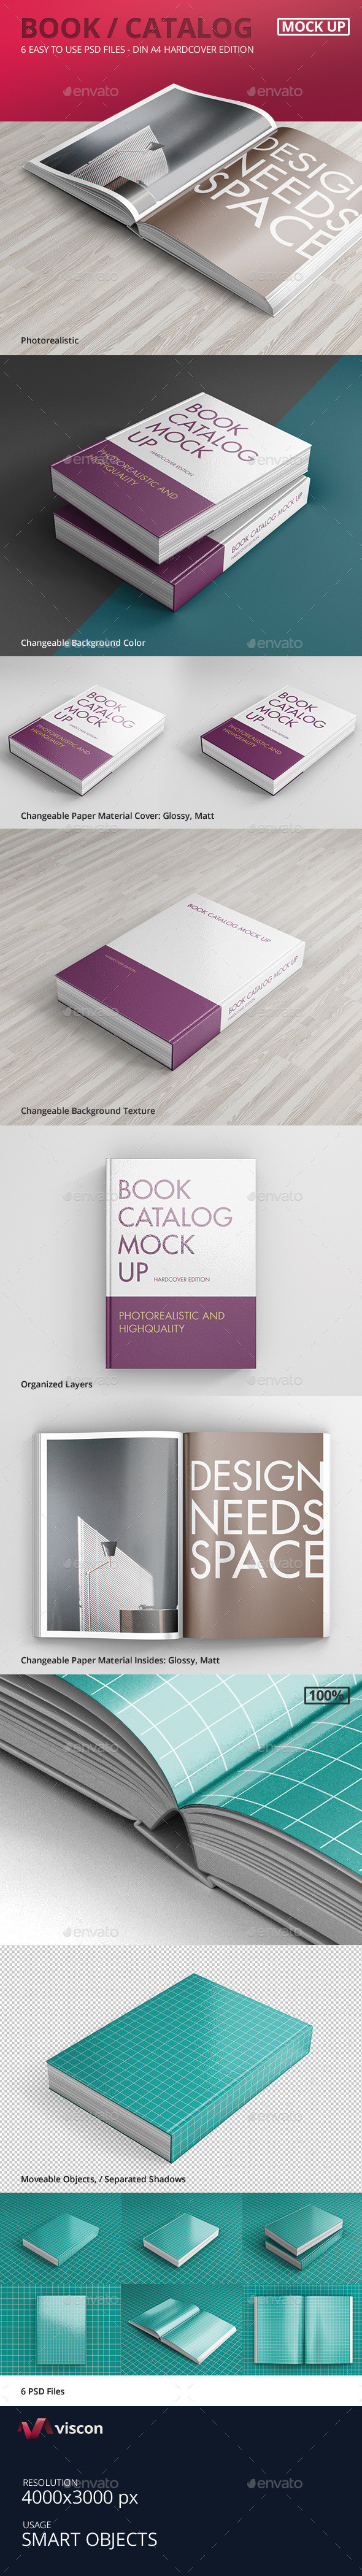 Book catalog hardcover productimage